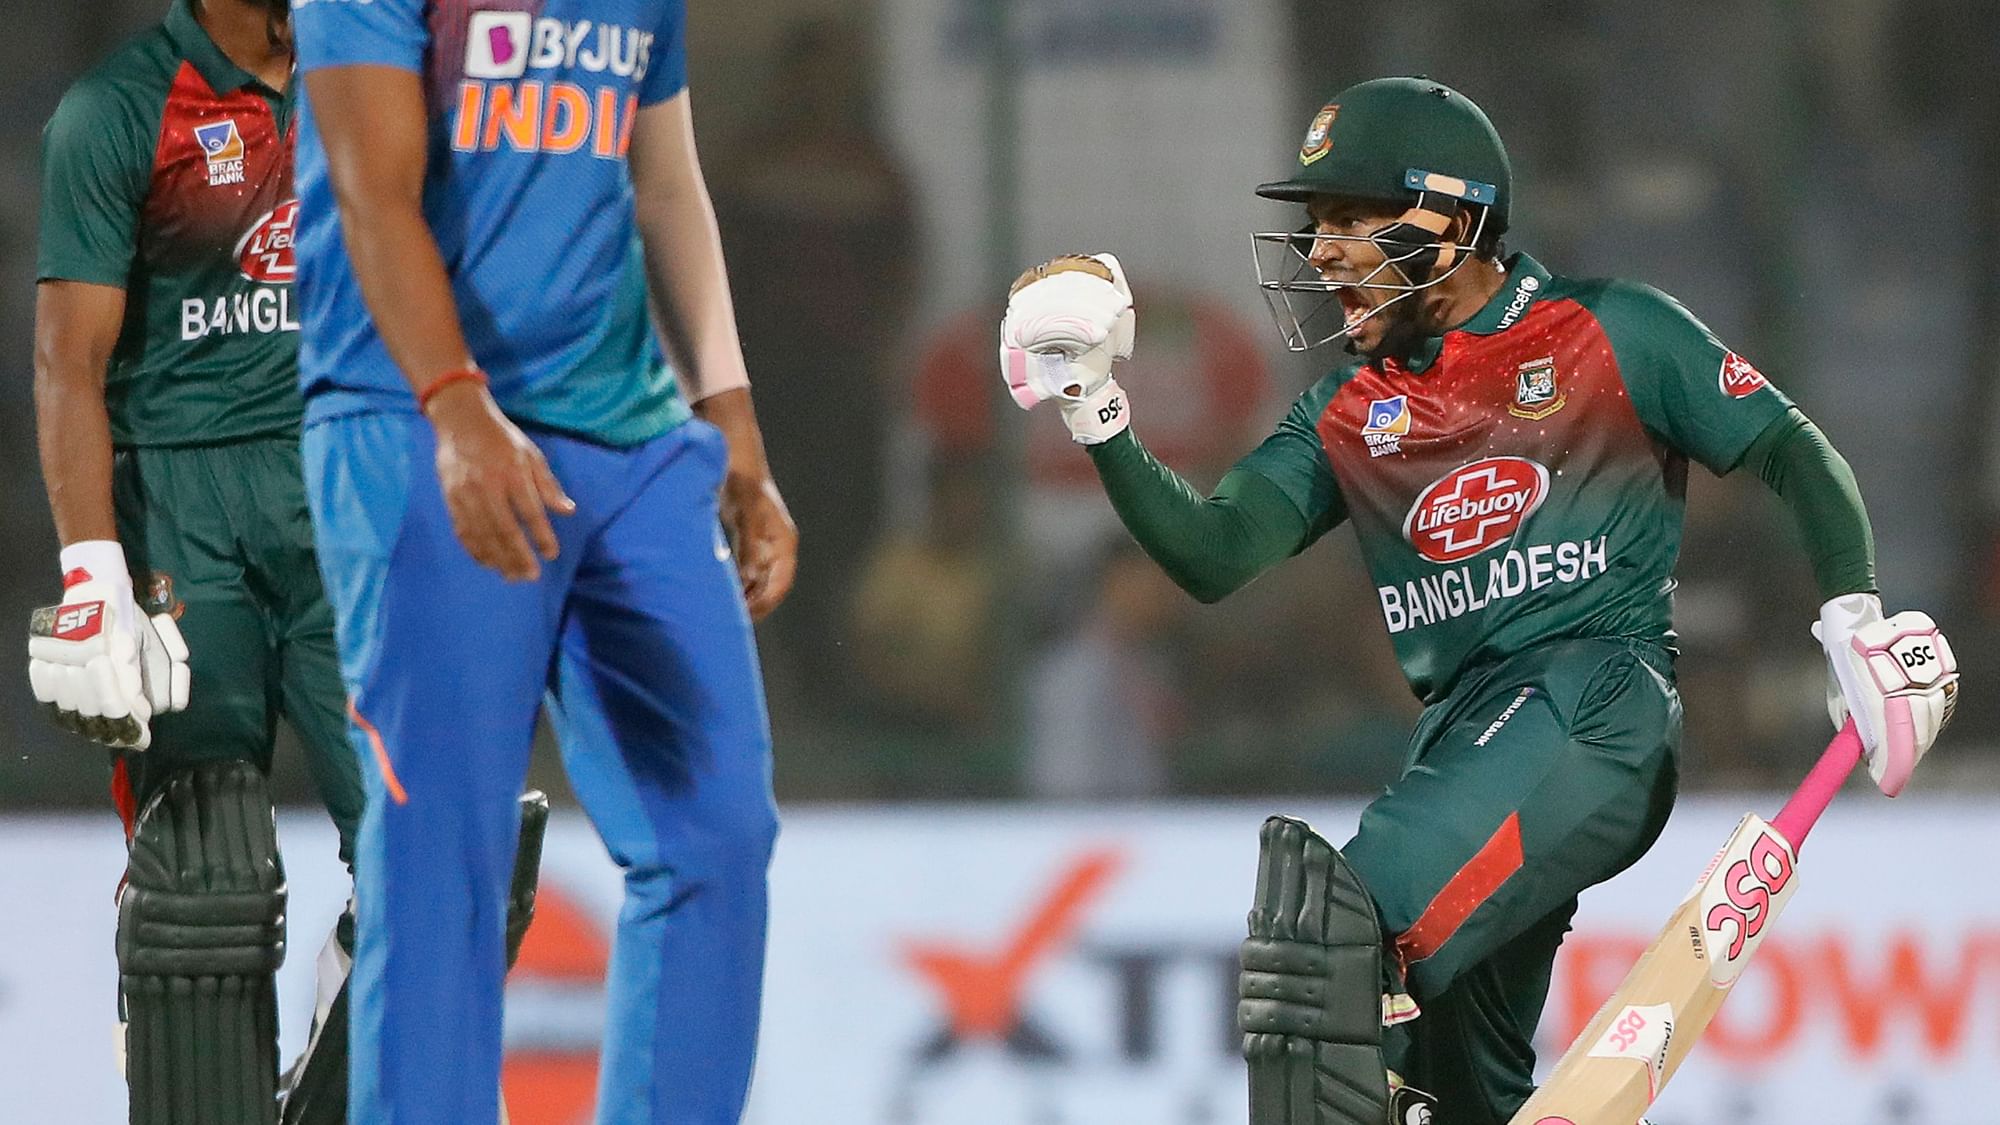 Bangladesh won their maiden T20 International over India with a seven-wicket victory in the series opener.